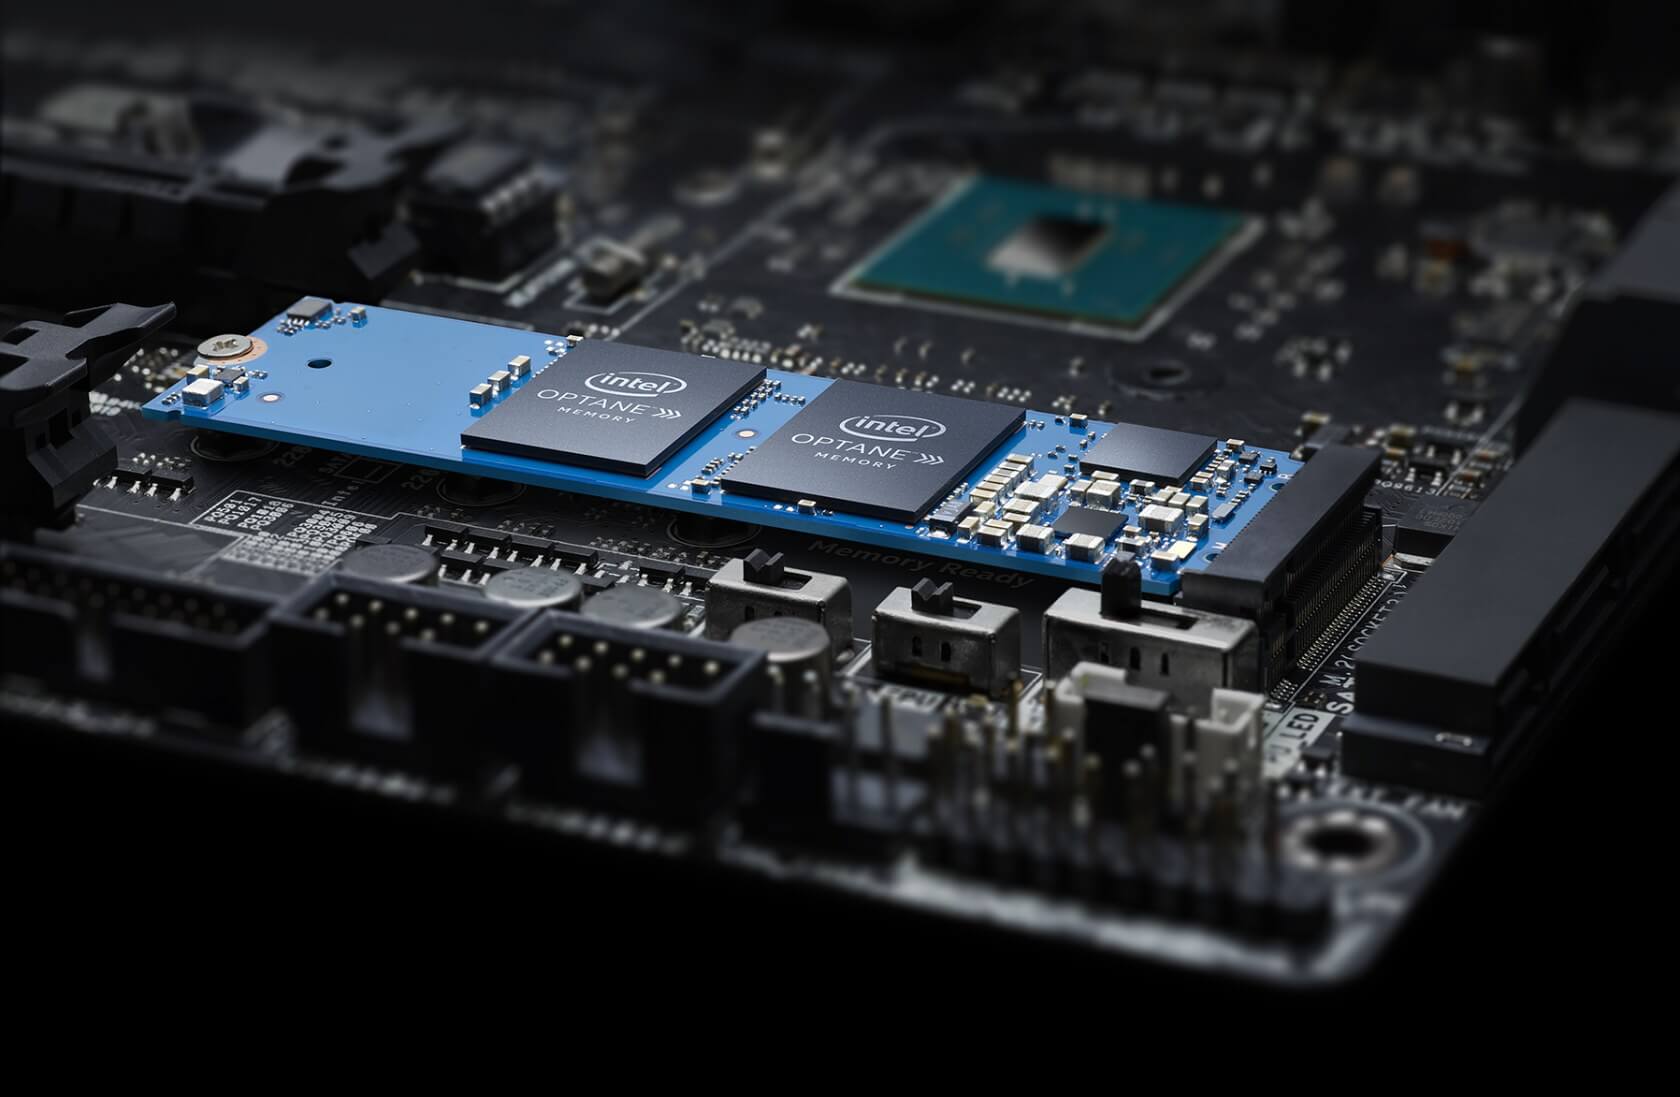 Intel is prototyping PCIe 4.0 SSDs, but needs AMD CPUs to test them